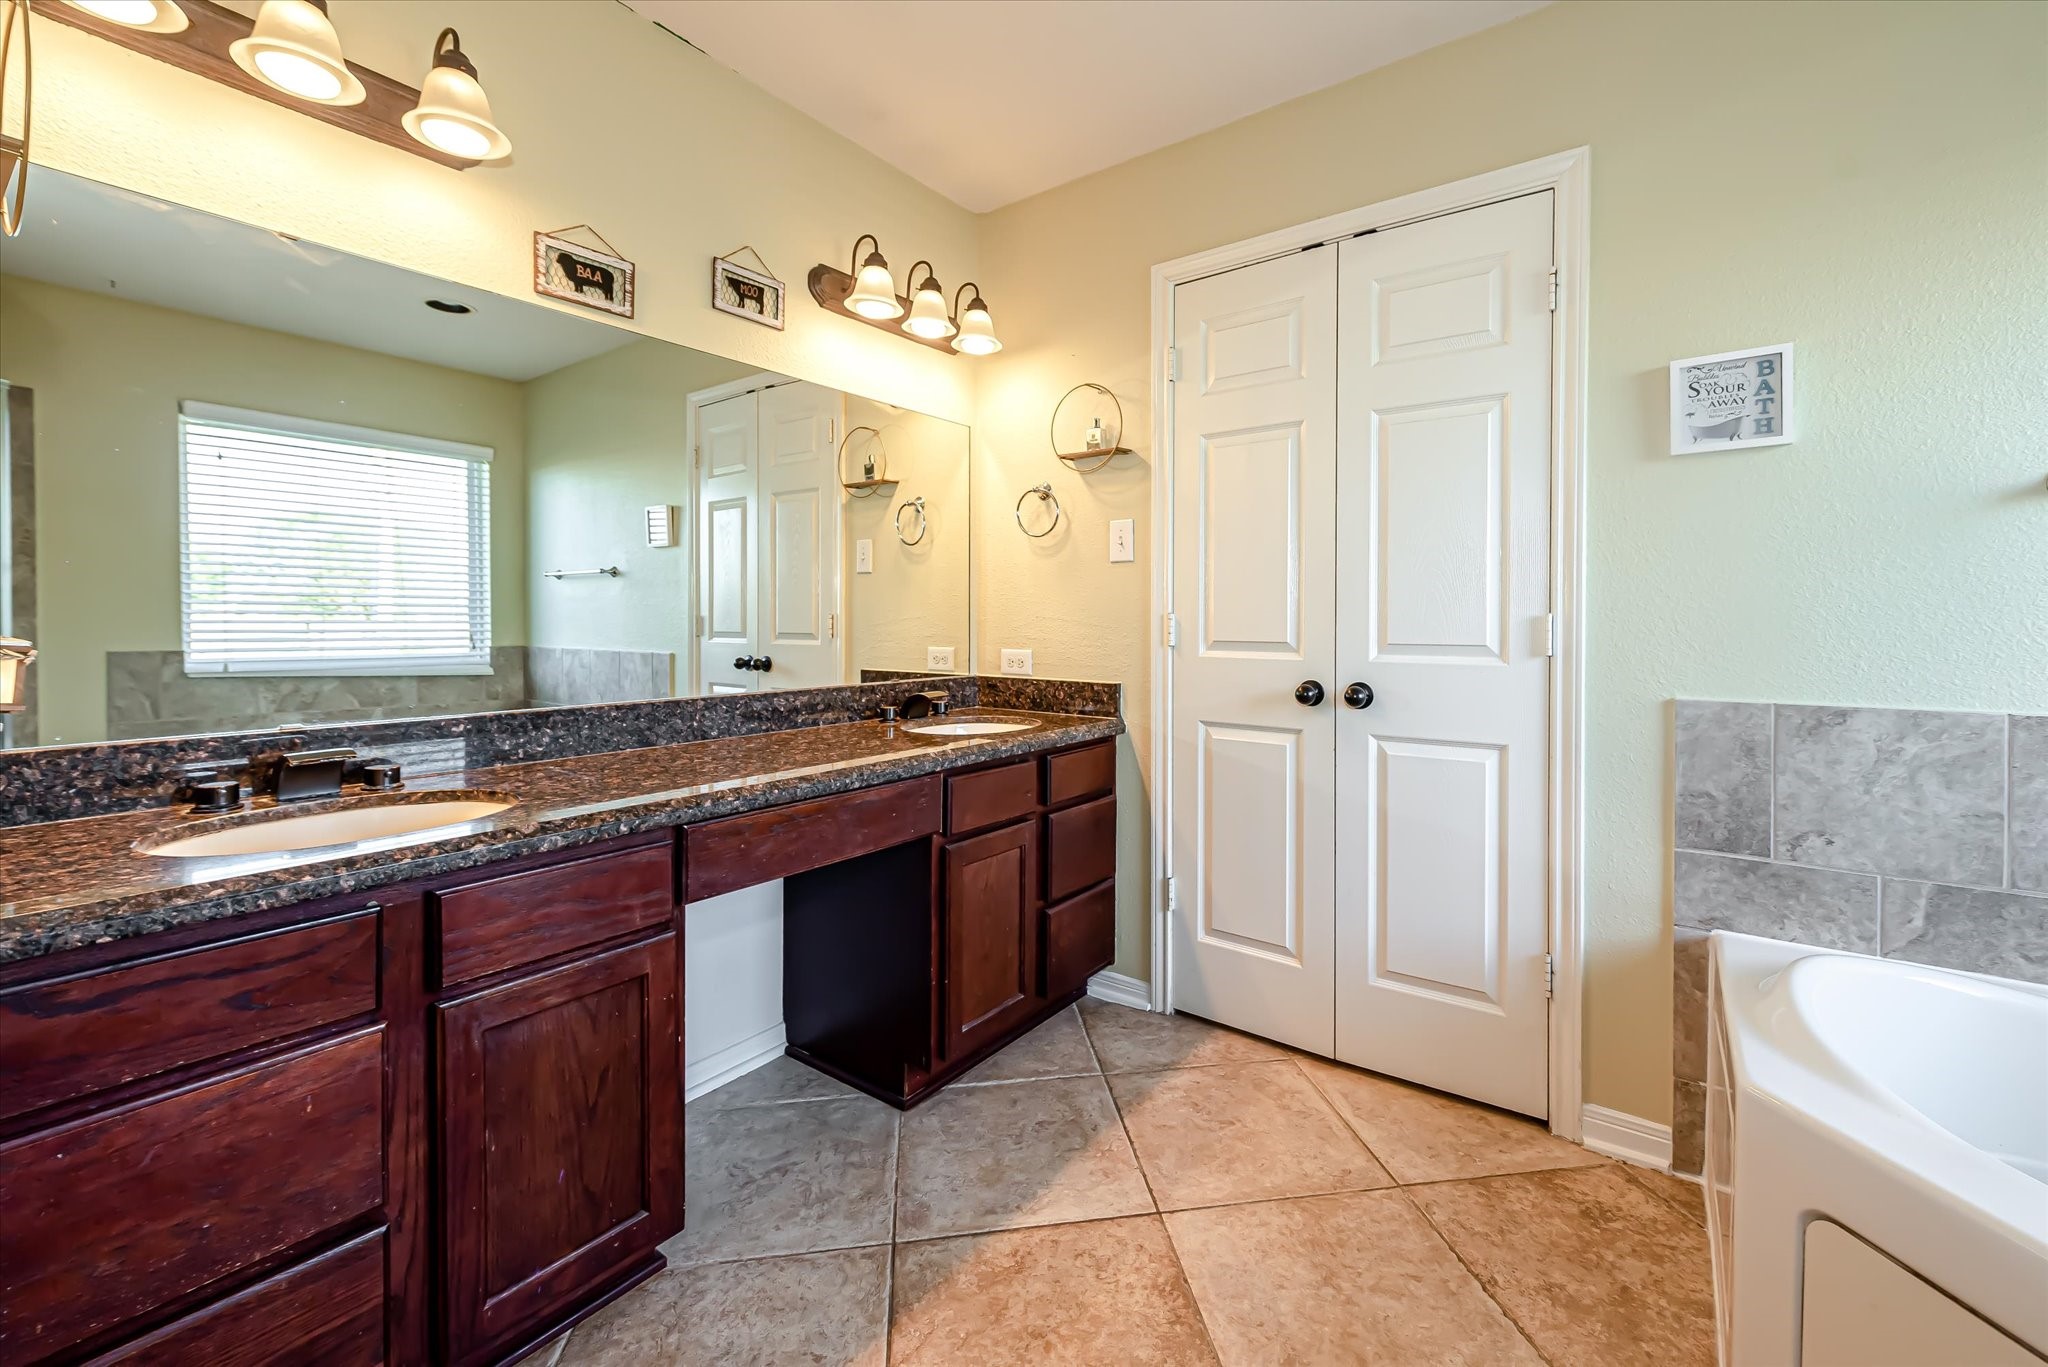 Primary bath has tile floor, granite counter, two sinks and seated vanity.